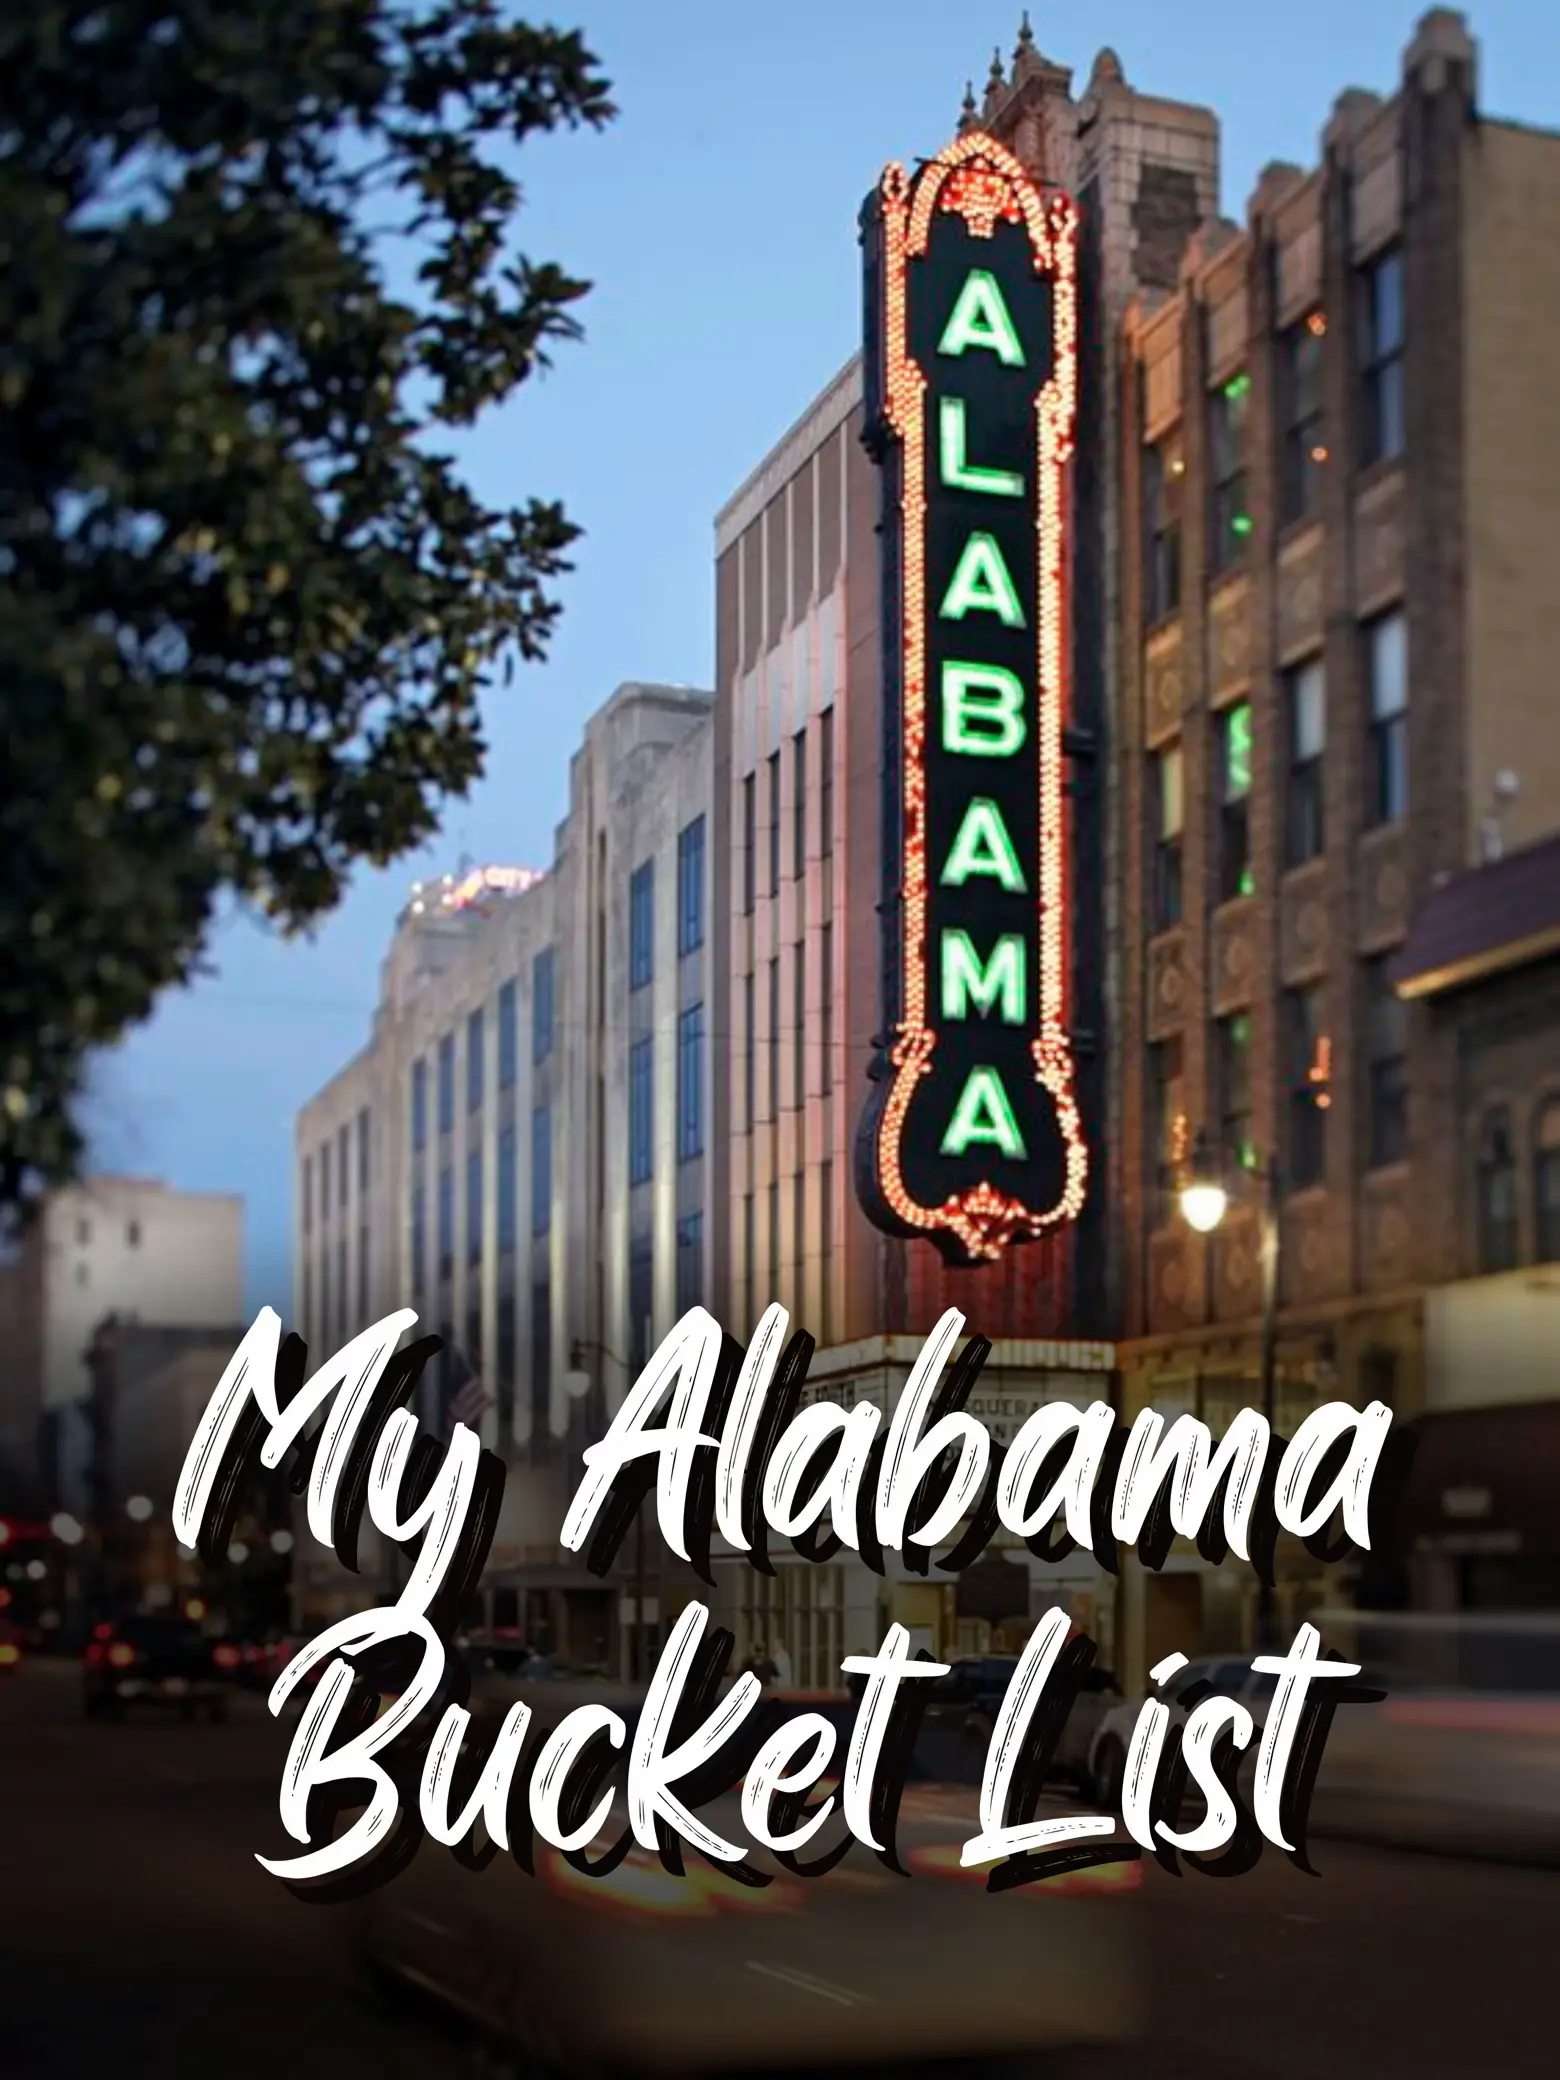  A sign with a green light on it that says "My Alabama Bucket List".